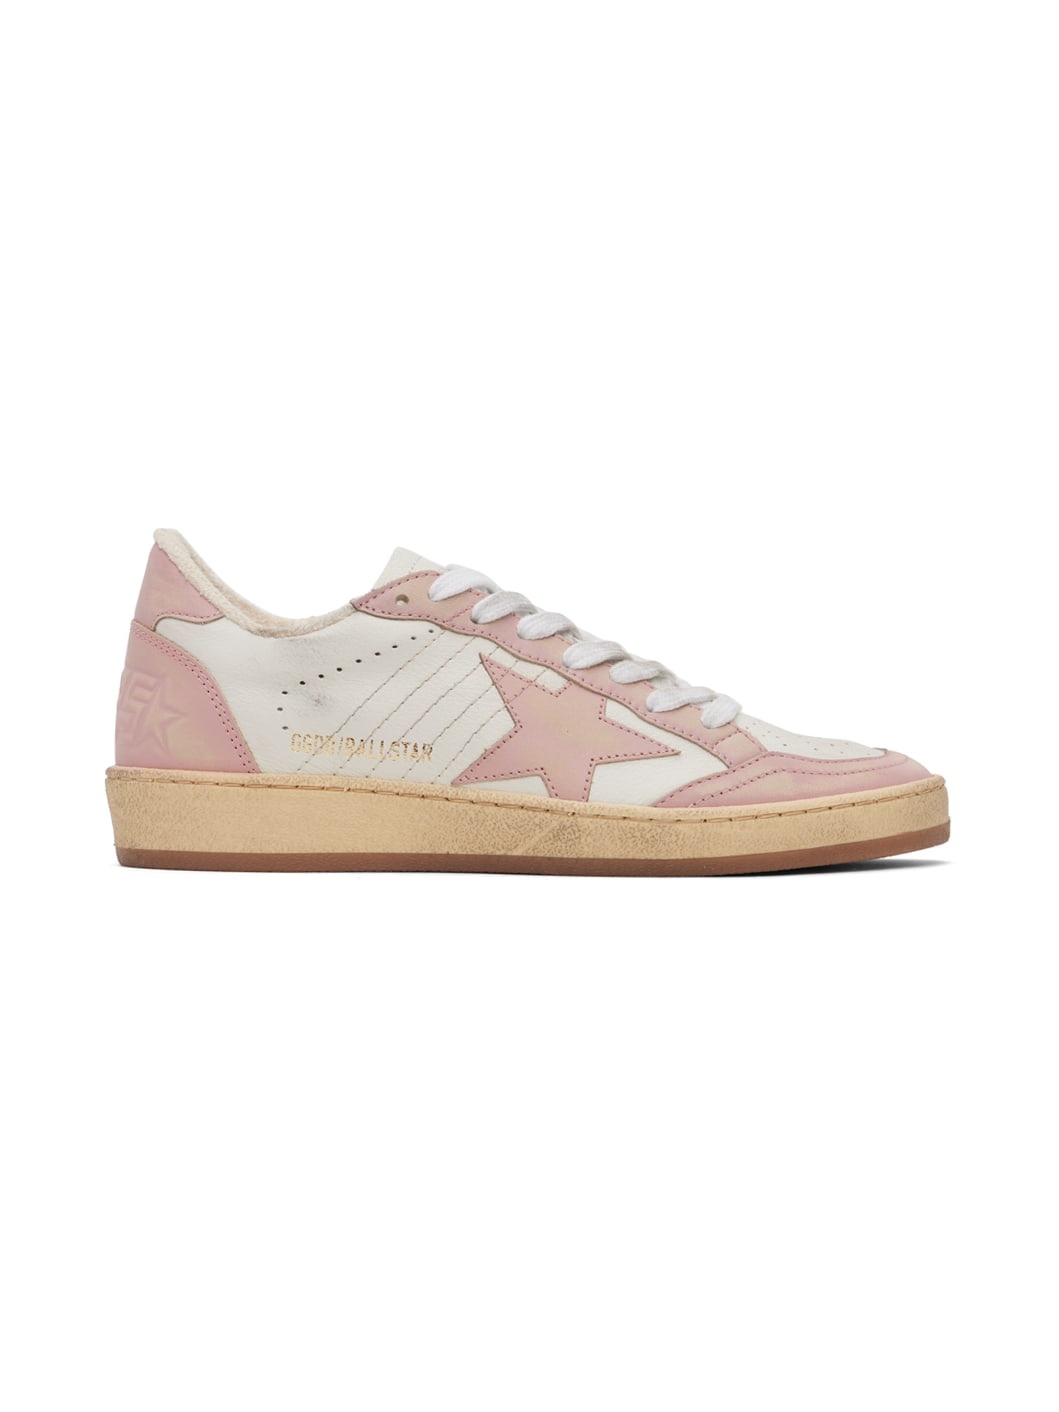 White & Pink Ball Star Sneakers - 1